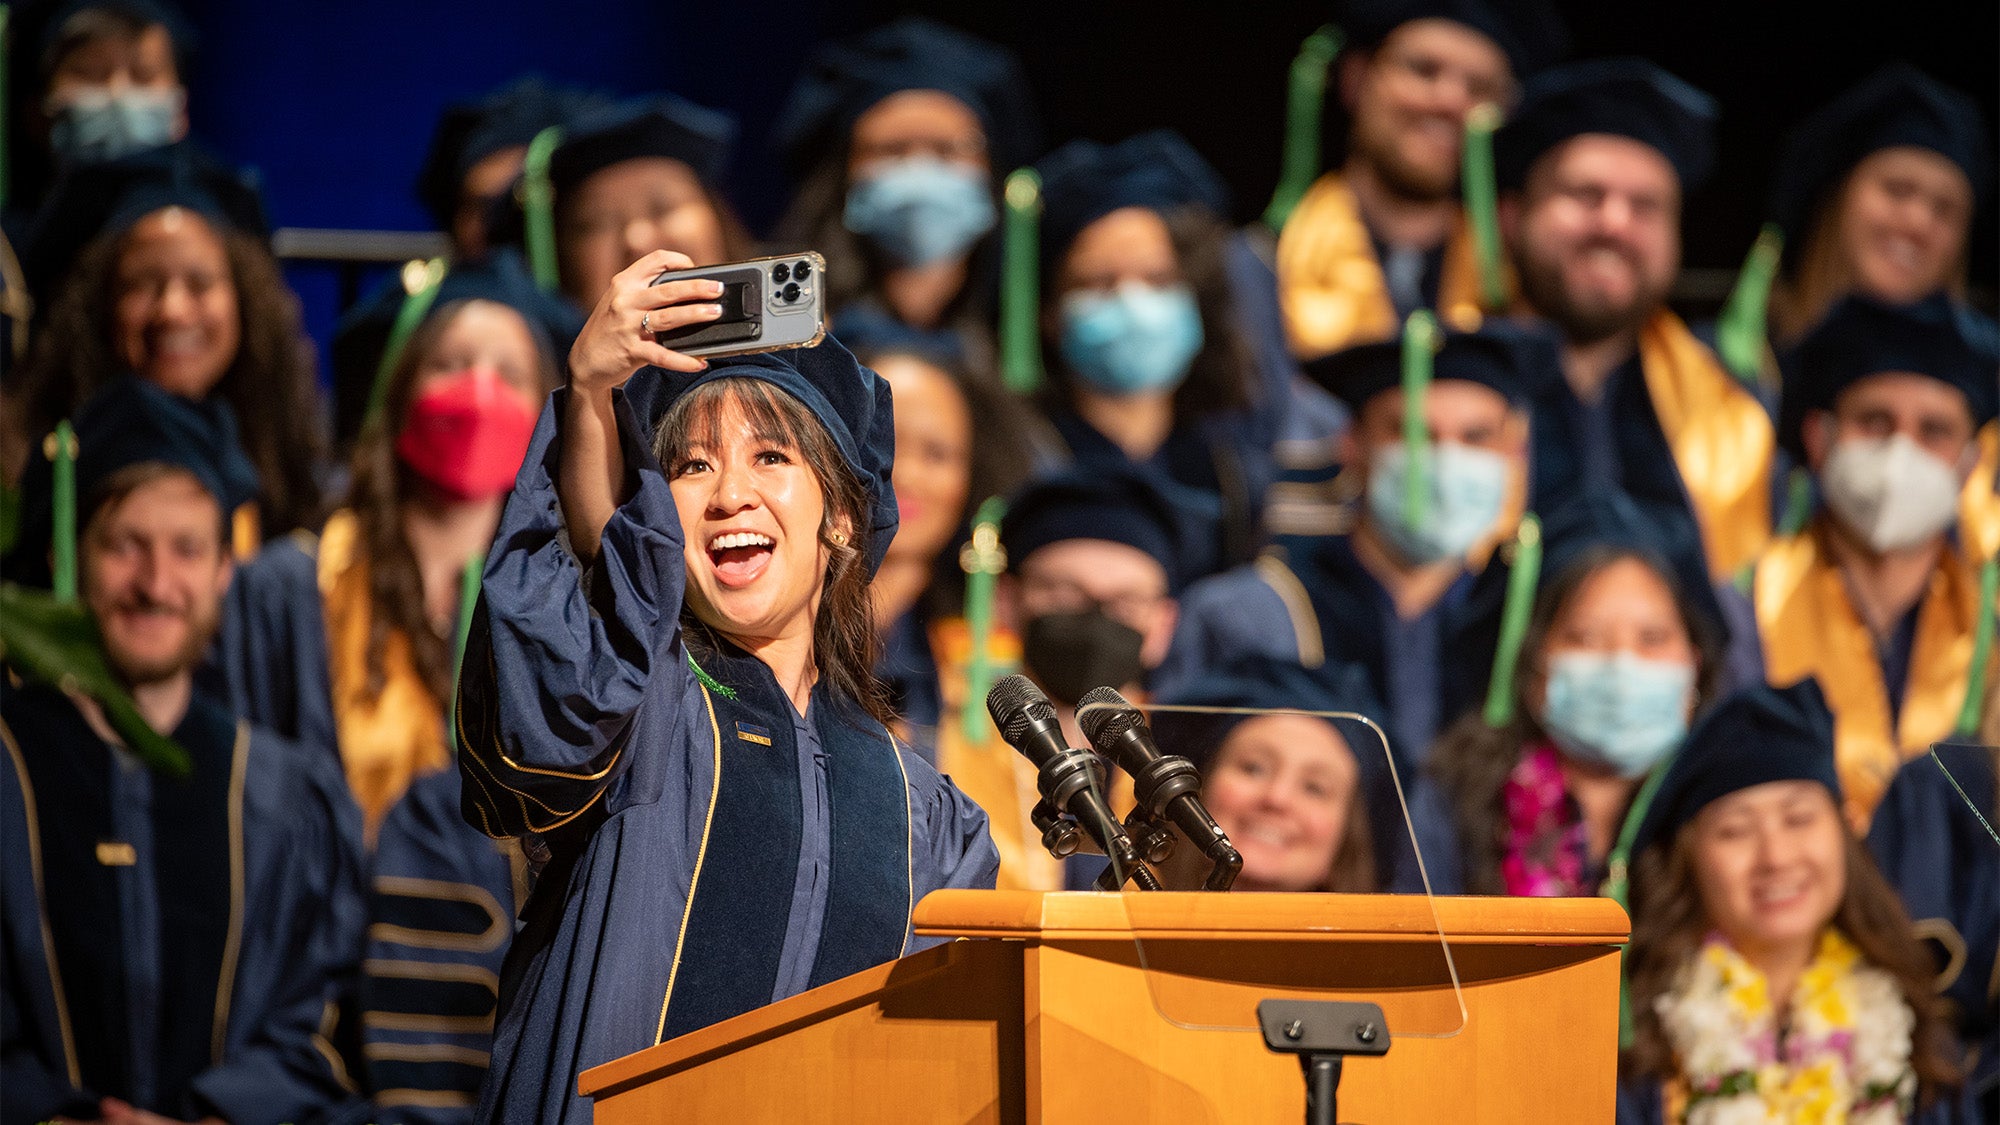 Speaker takes selfie at commencement lectern